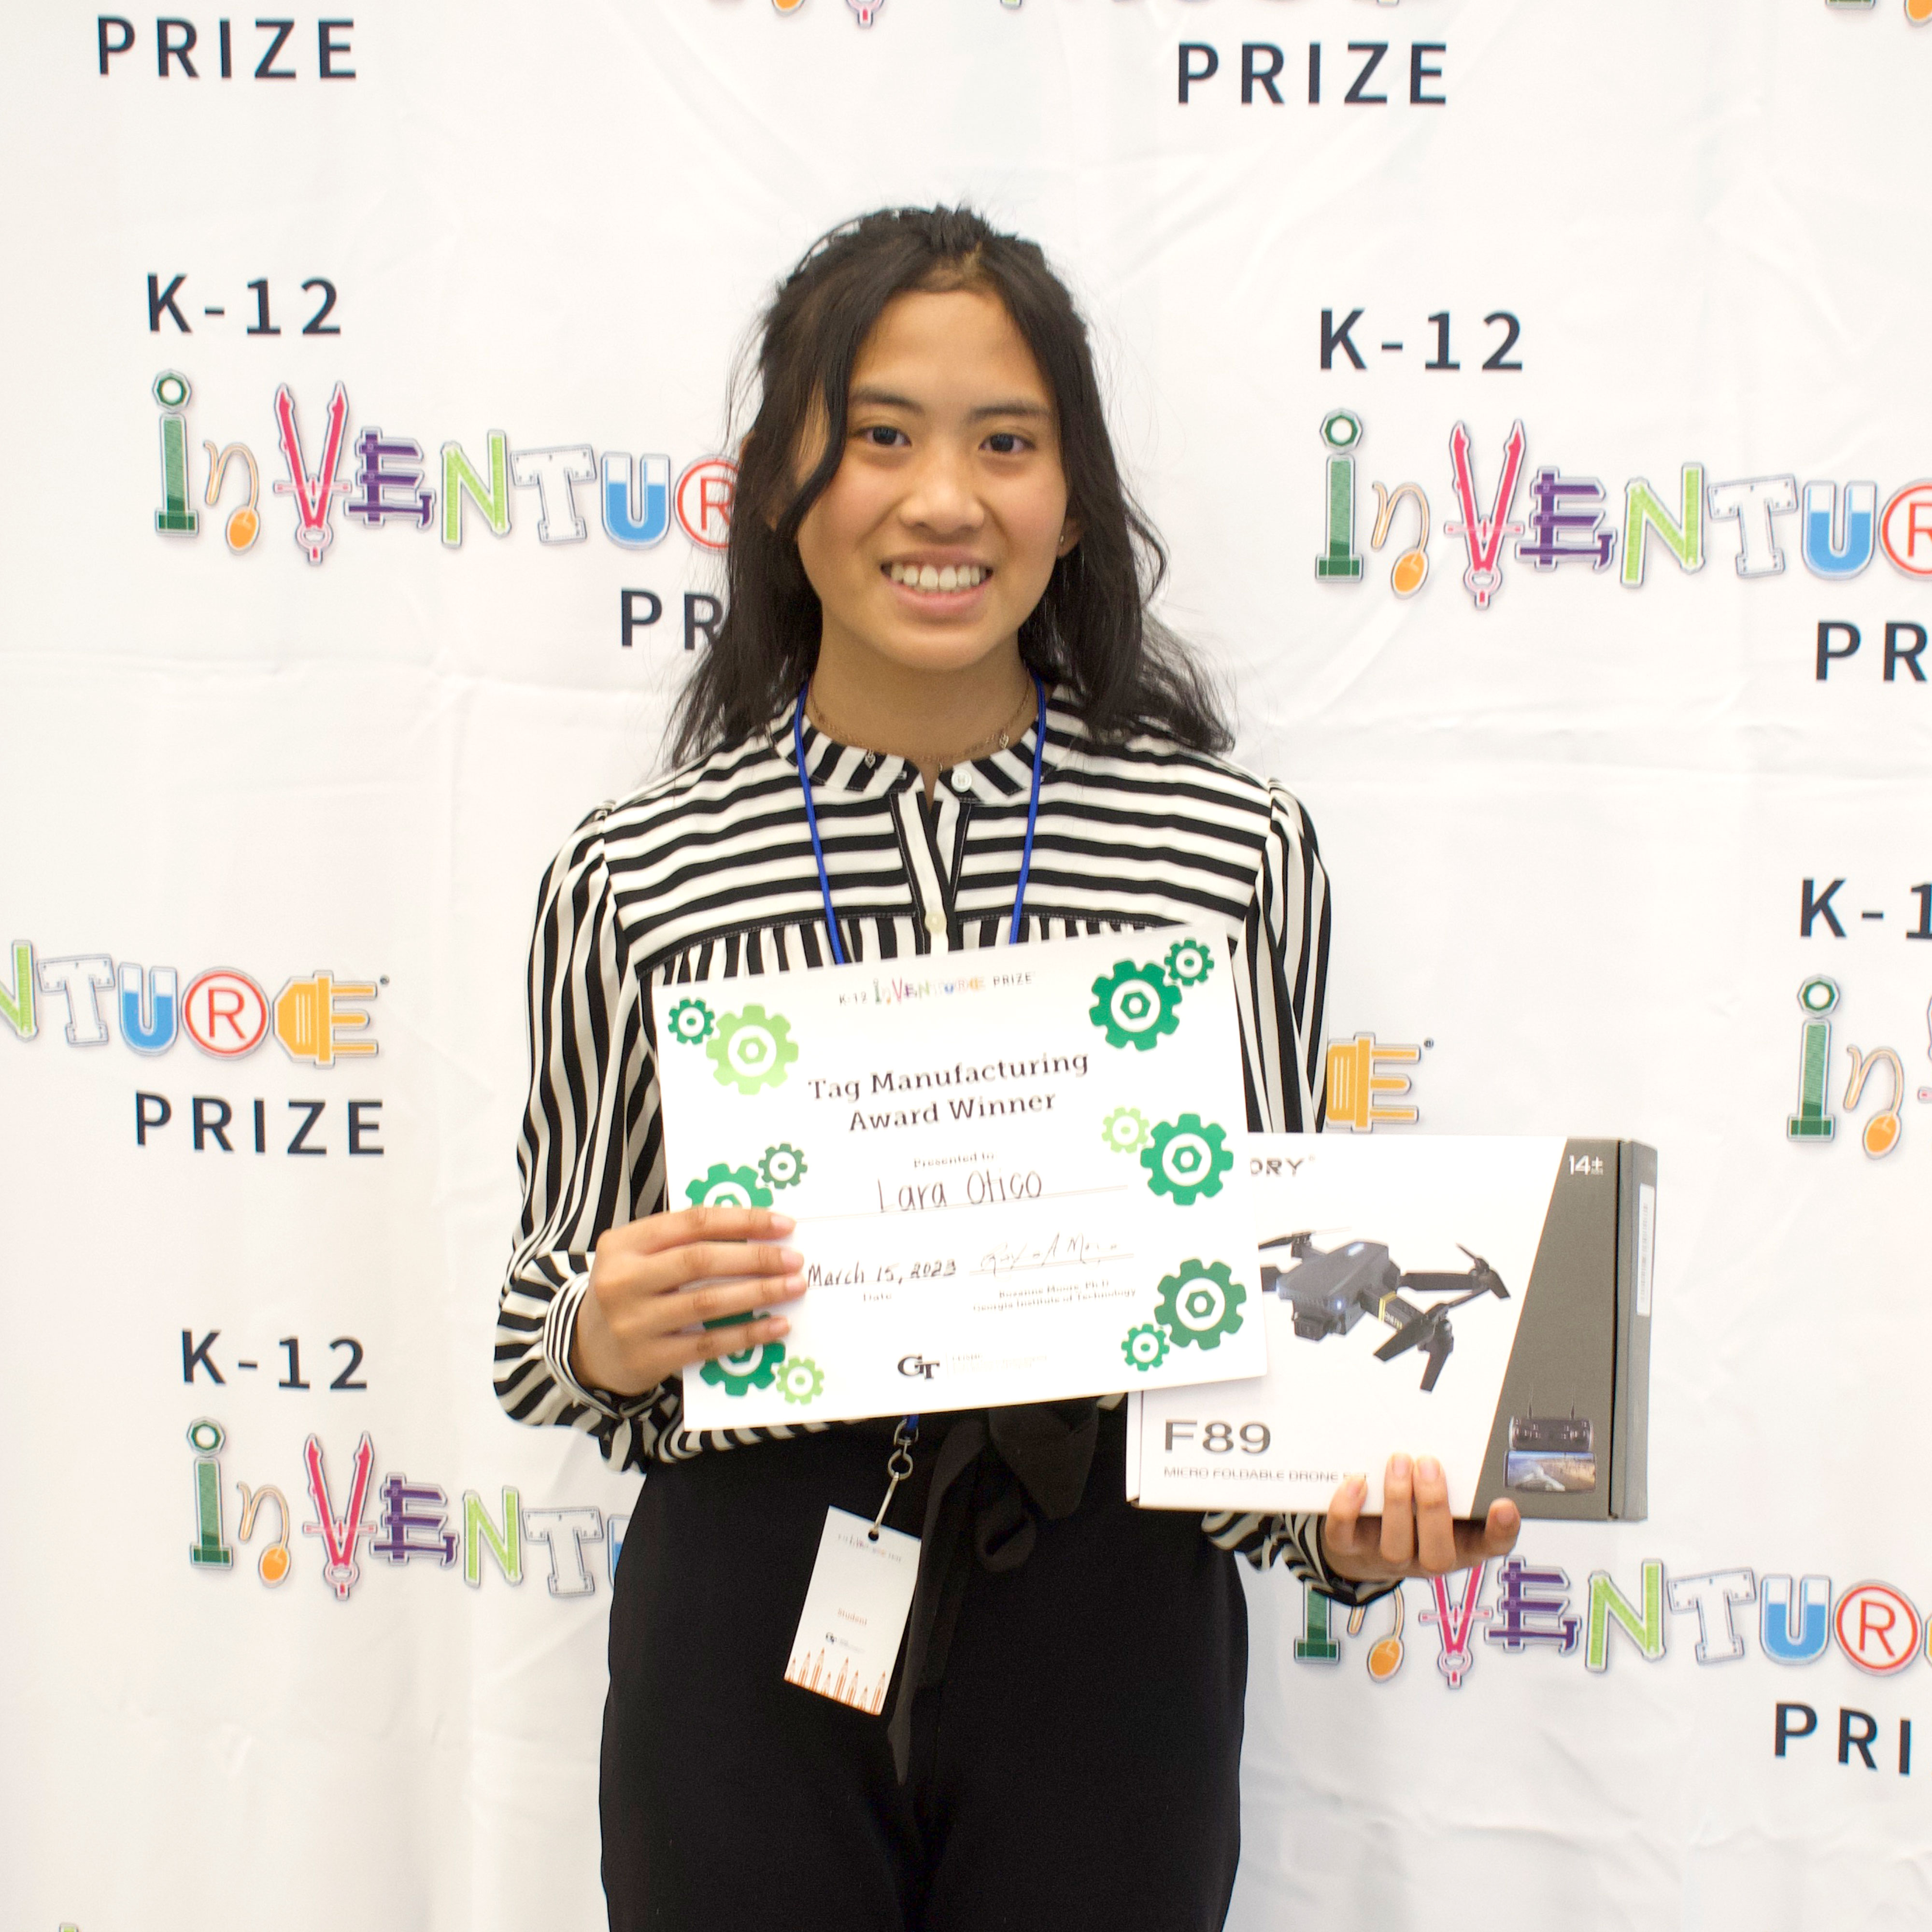 A smiling student holding up a certificate and a prize (drone)